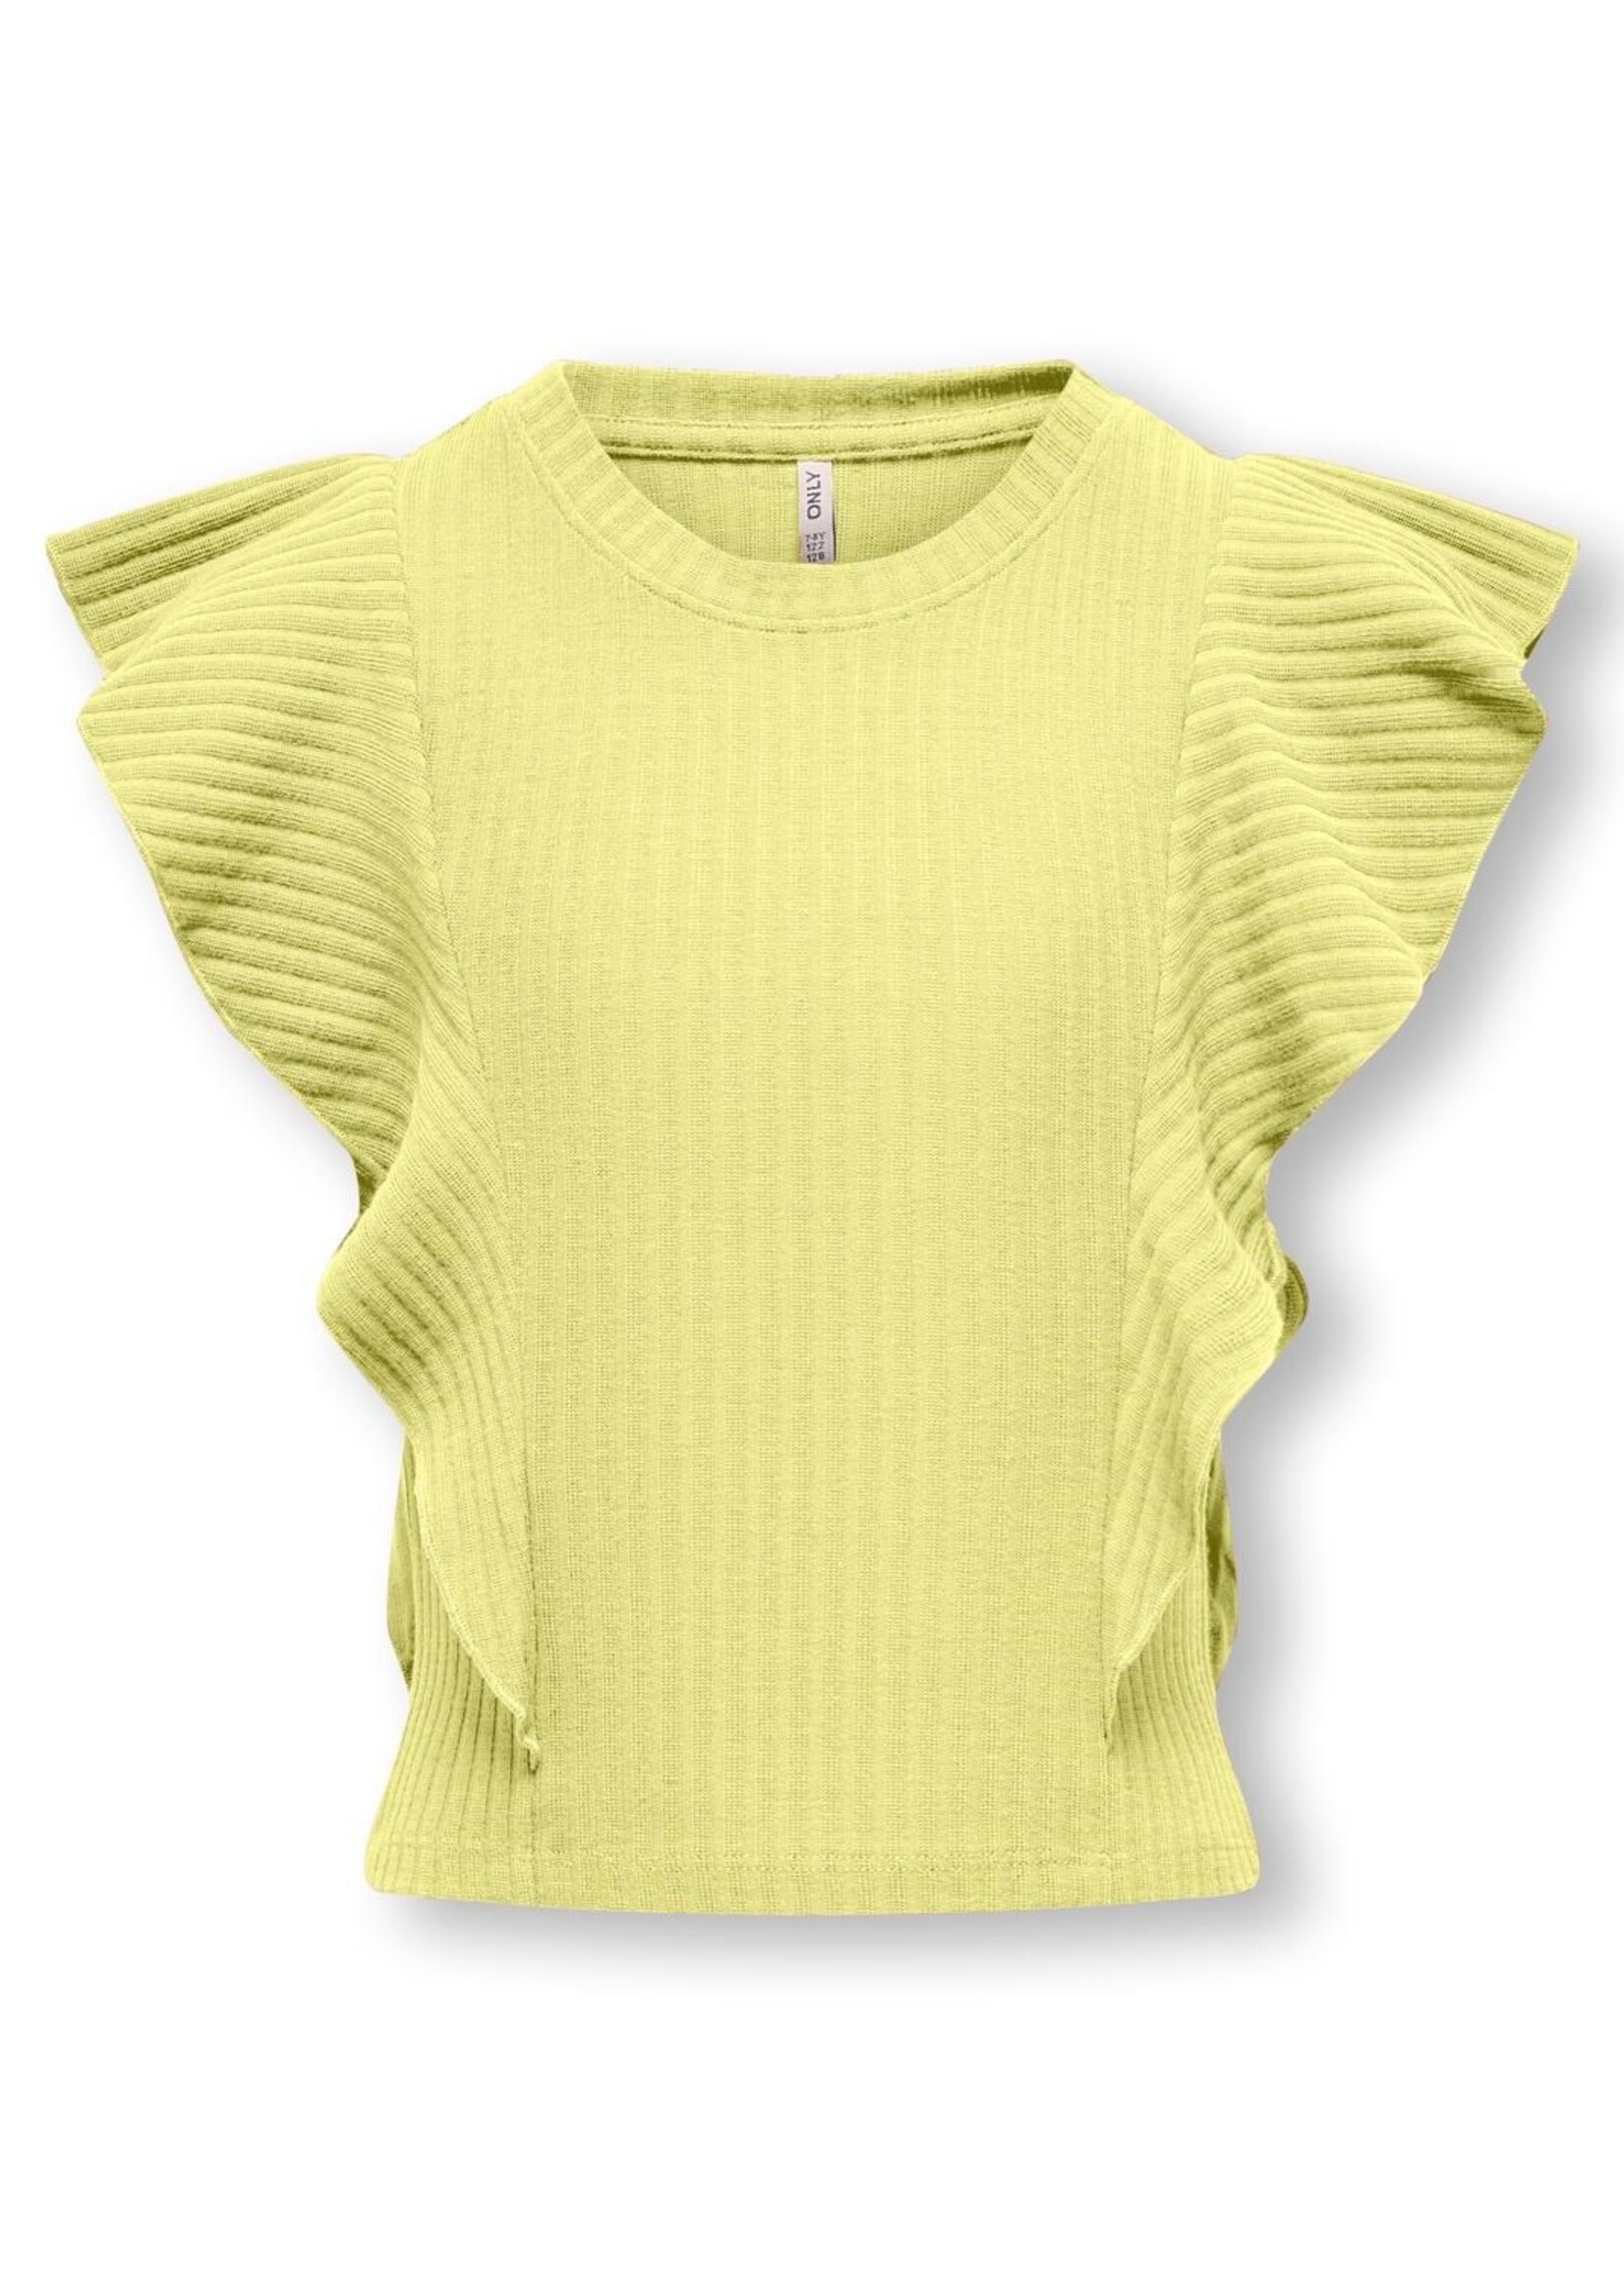 KIDS ONLY Nella Short Ruffle Top Yellow Pear 15291900